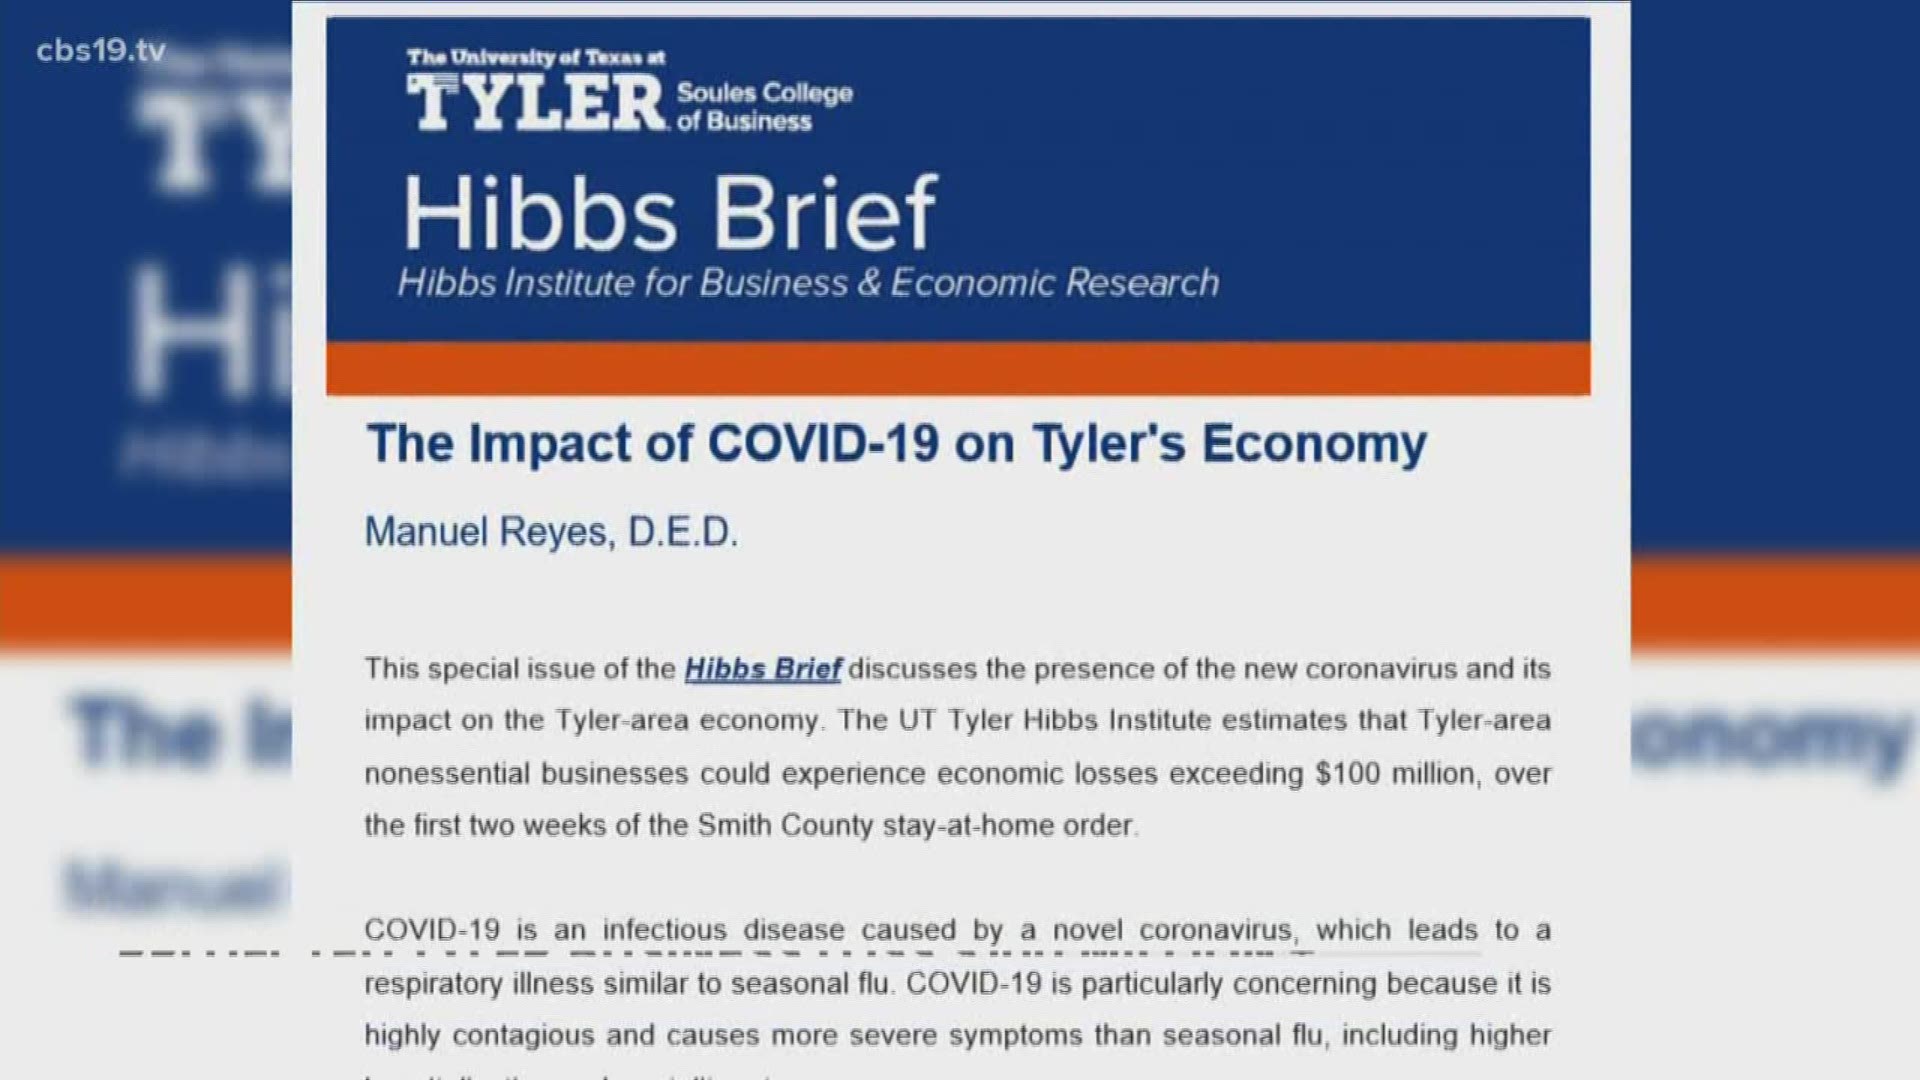 UT Tyler’s Hibbs Institute released a report detailing an estimated more than $100 million in losses for Tyler business due to Smith County’s stay at home order.